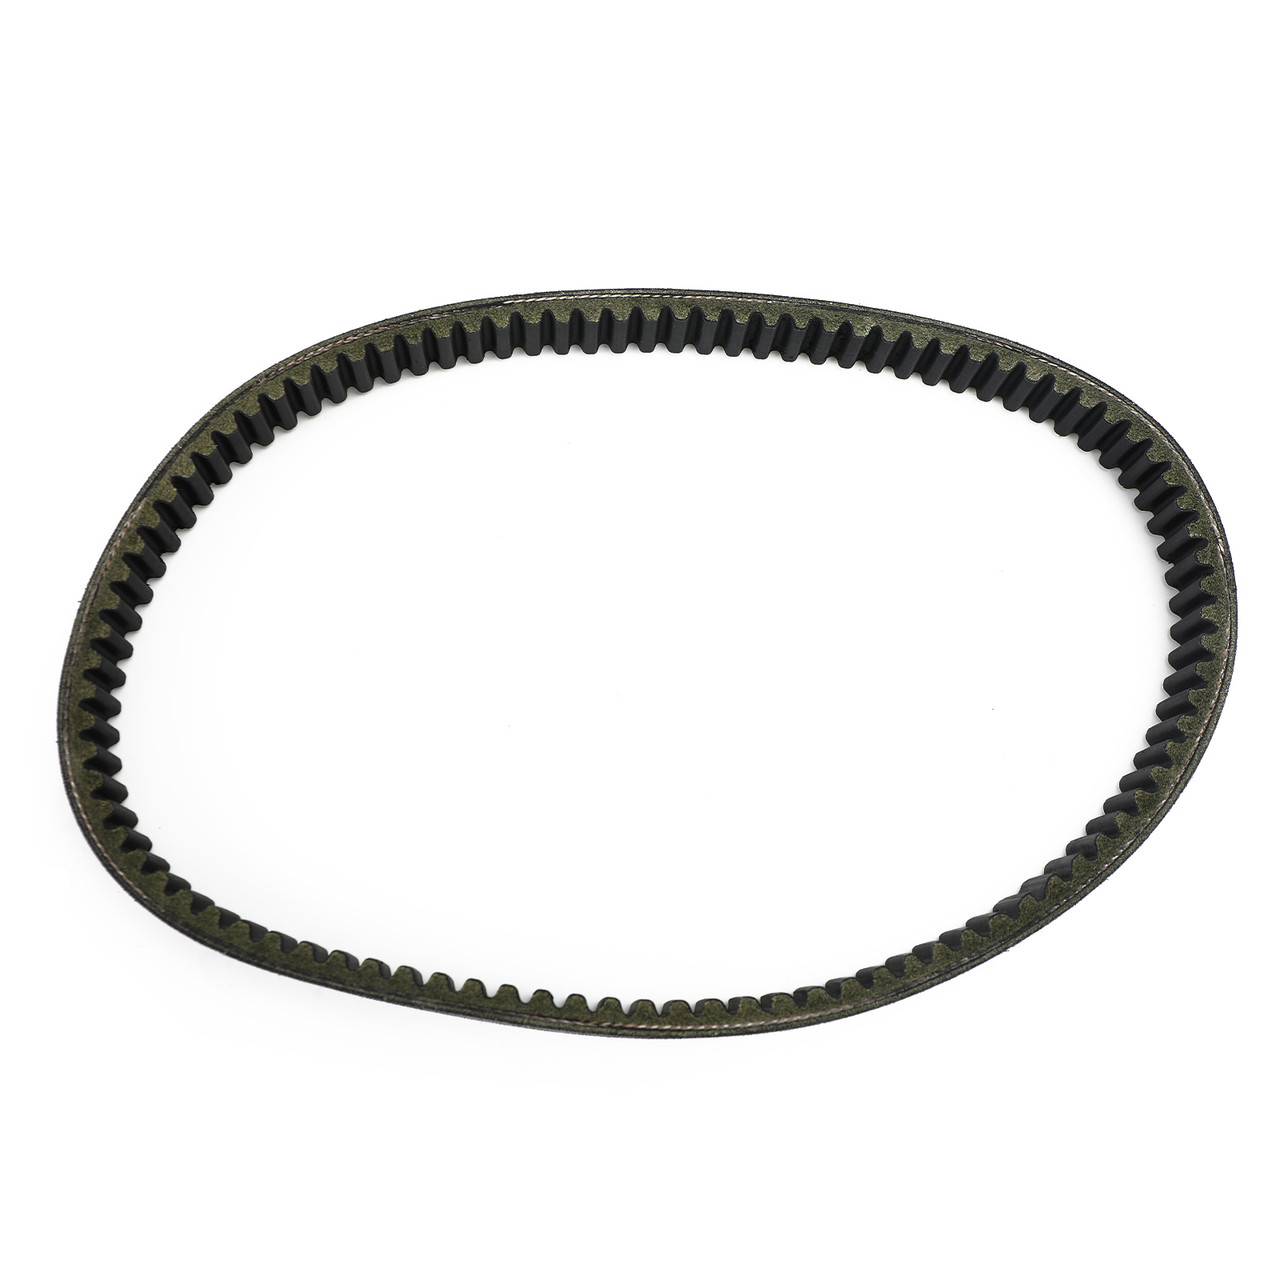 Final Drive Transmission Belt Fit for Yamaha XC155 SMAX S-Max 155 2015-2020